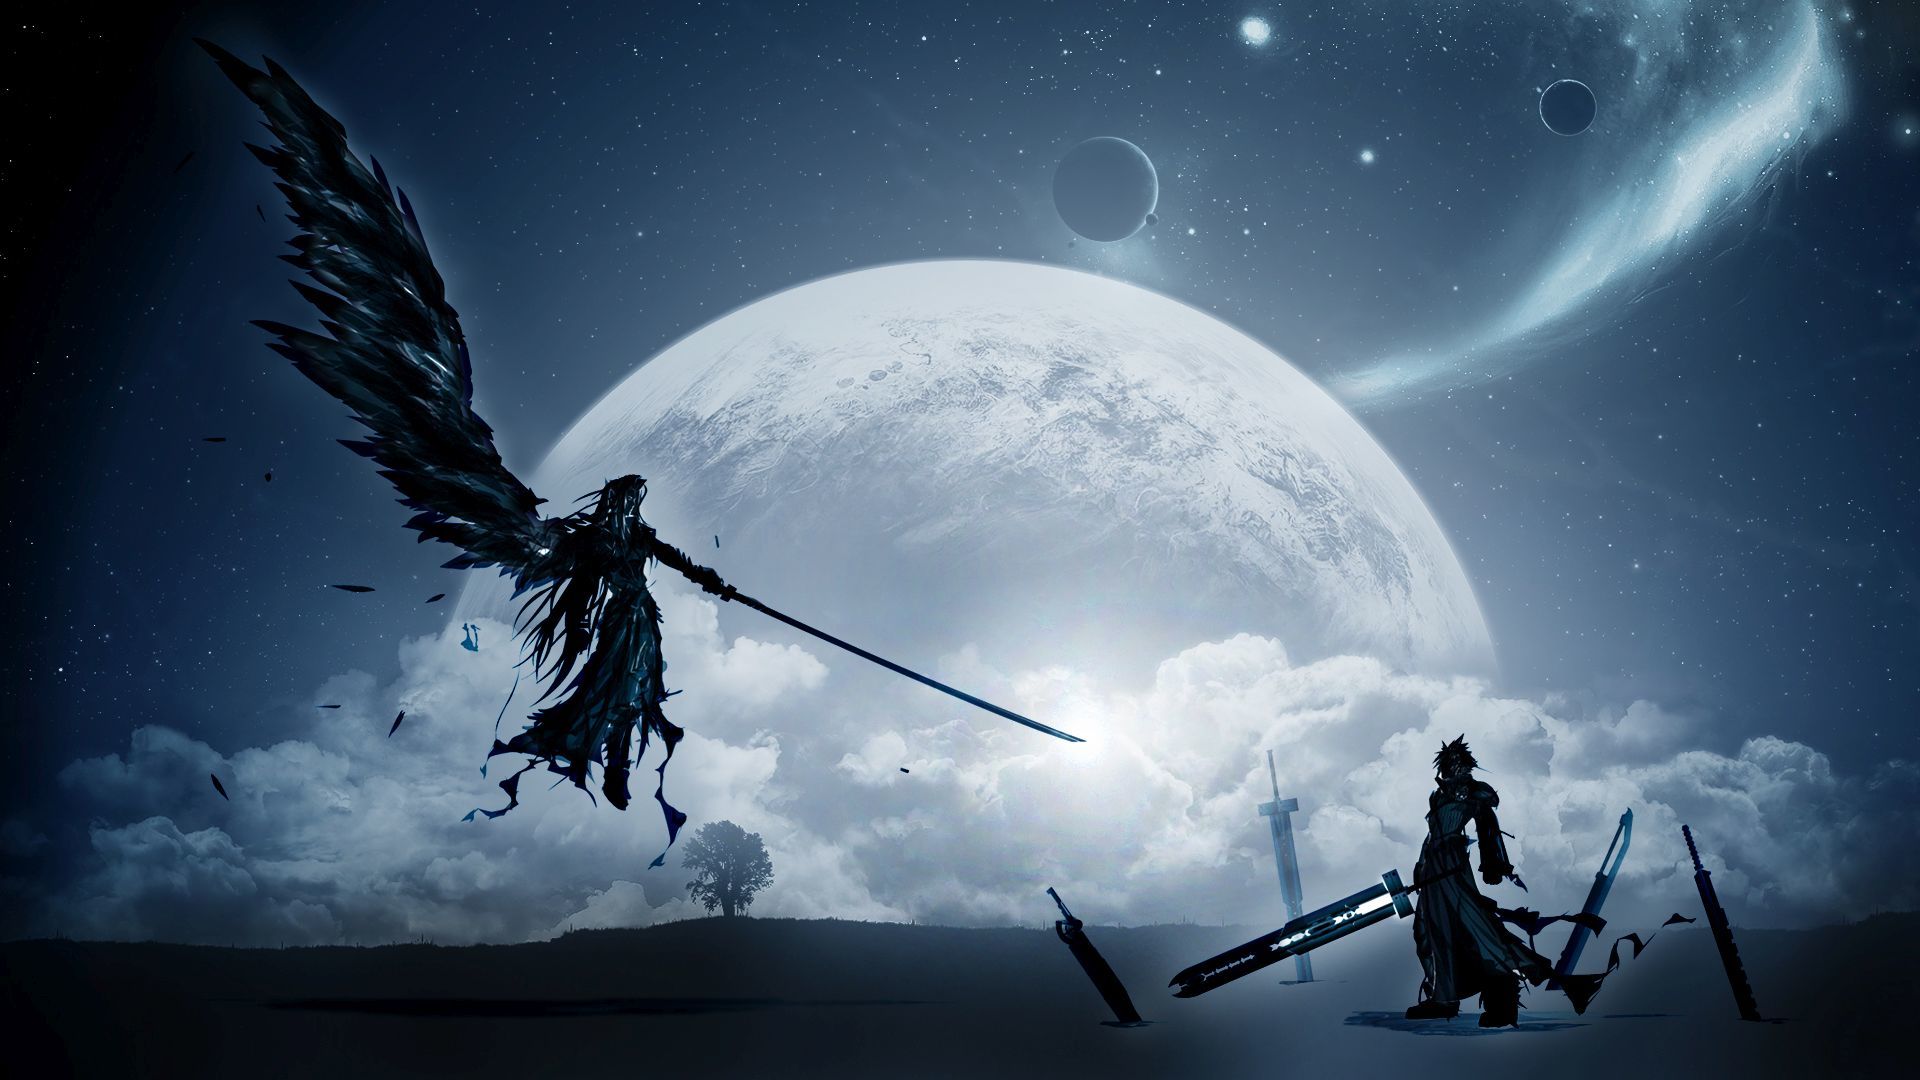 Watch The New Final Fantasy HD Wallpaper And Pictures